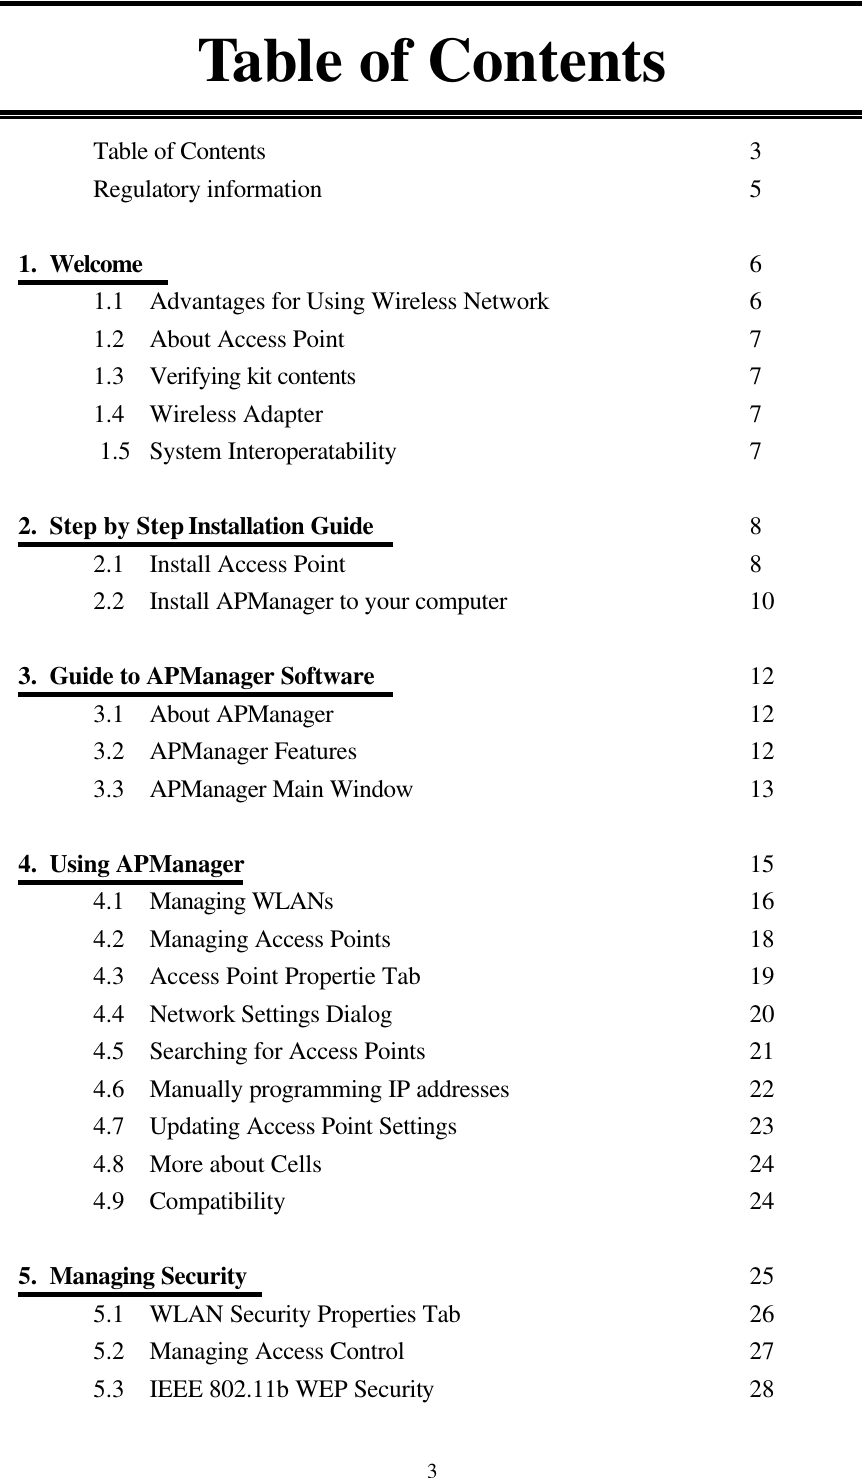  3 Table of Contents  Table of Contents          3 Regulatory information         5  1.  Welcome             6 1.1  Advantages for Using Wireless Network        6 1.2  About Access Point         7 1.3  Verifying kit contents        7 1.4  Wireless Adapter         7     1.5  System Interoperatability       7  2.  Step by Step Installation Guide        8 2.1  Install Access Point         8 2.2 Install APManager to your computer          10  3.  Guide to APManager Software        12 3.1  About APManager         12 3.2  APManager Features        12 3.3  APManager Main Window       13  4.  Using APManager           15 4.1  Managing WLANs          16 4.2  Managing Access Points         18 4.3  Access Point Propertie Tab       19 4.4  Network Settings Dialog         20 4.5  Searching for Access Points       21 4.6  Manually programming IP addresses          22 4.7  Updating Access Point Settings        23 4.8  More about Cells           24 4.9  Compatibility          24  5.  Managing Security          25 5.1  WLAN Security Properties Tab              26 5.2  Managing Access Control        27 5.3  IEEE 802.11b WEP Security       28 